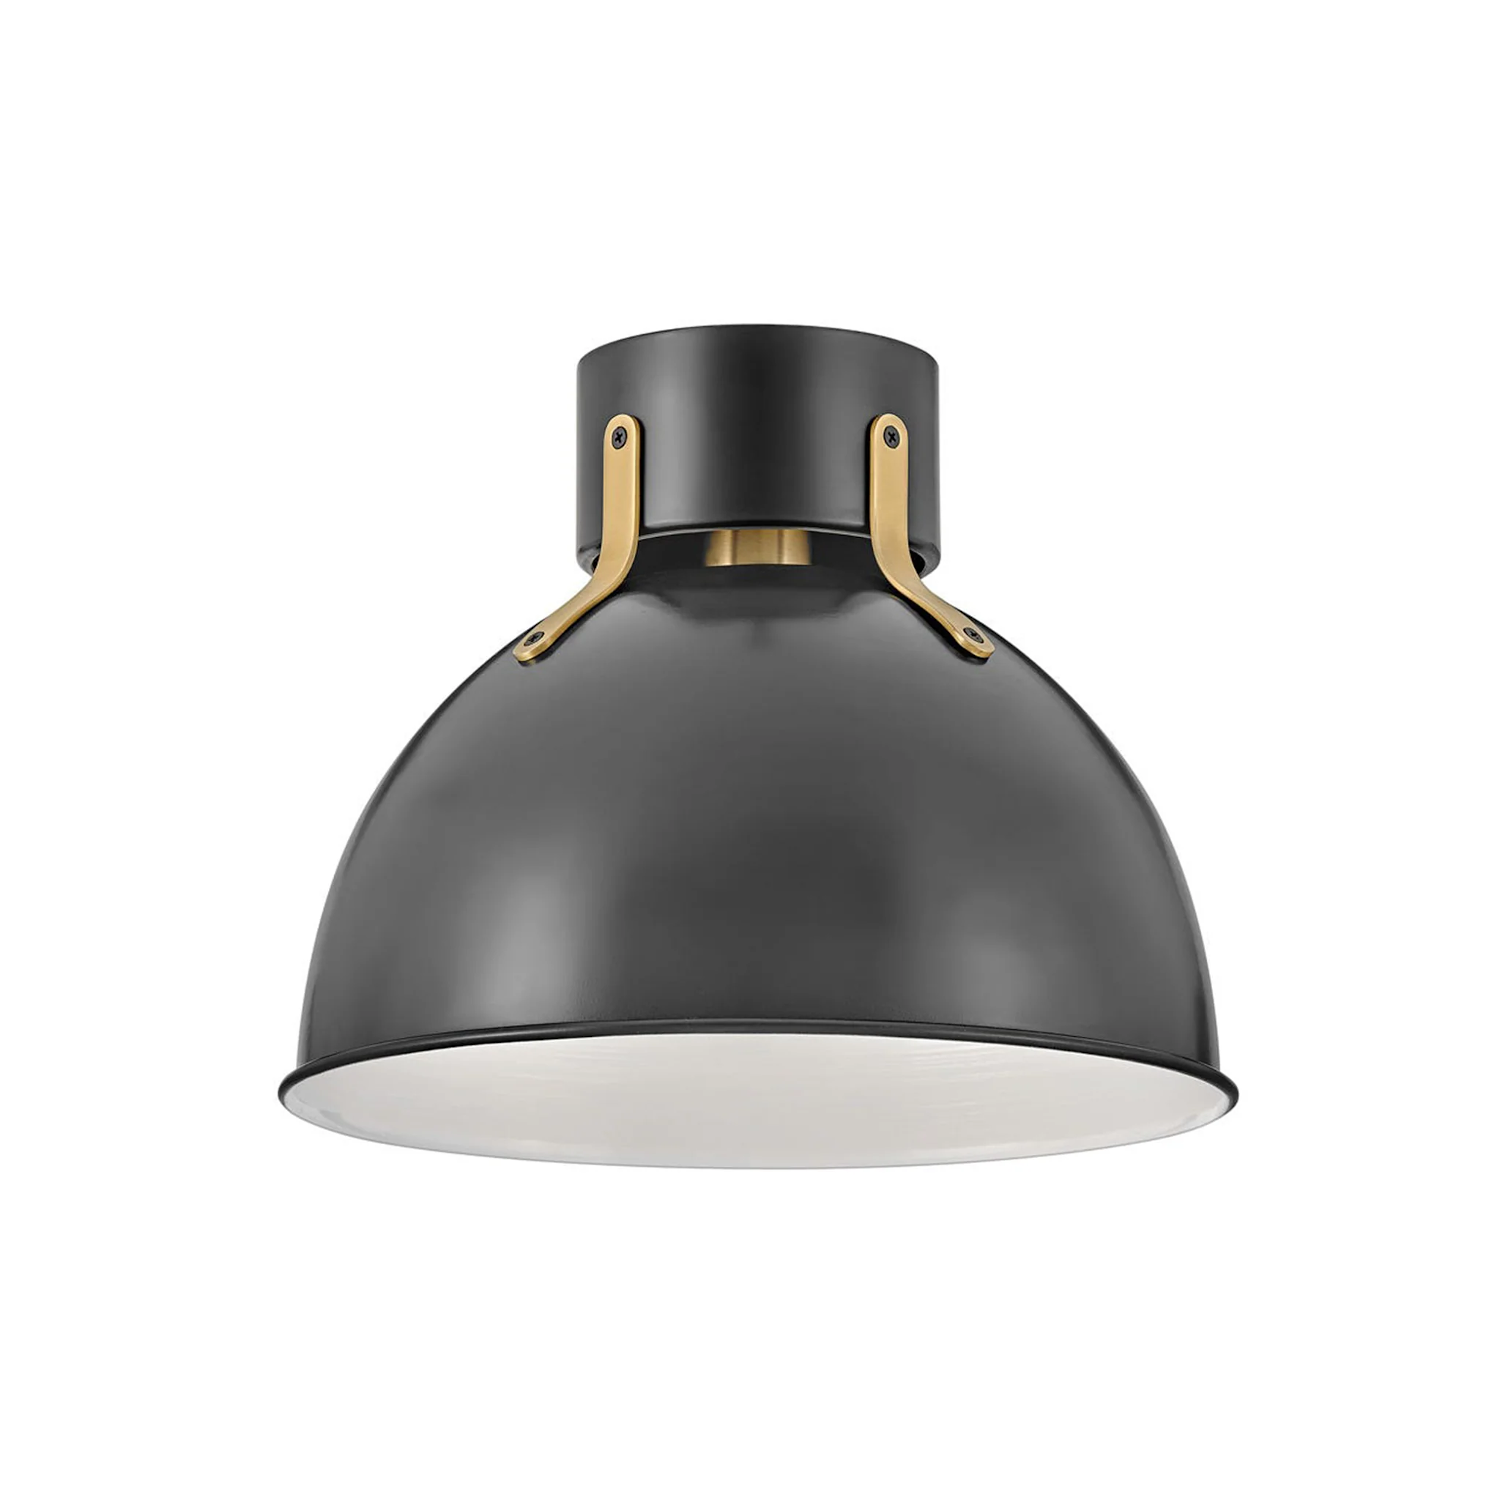 Product image of Argo Ceiling Light Black with Brass Accents